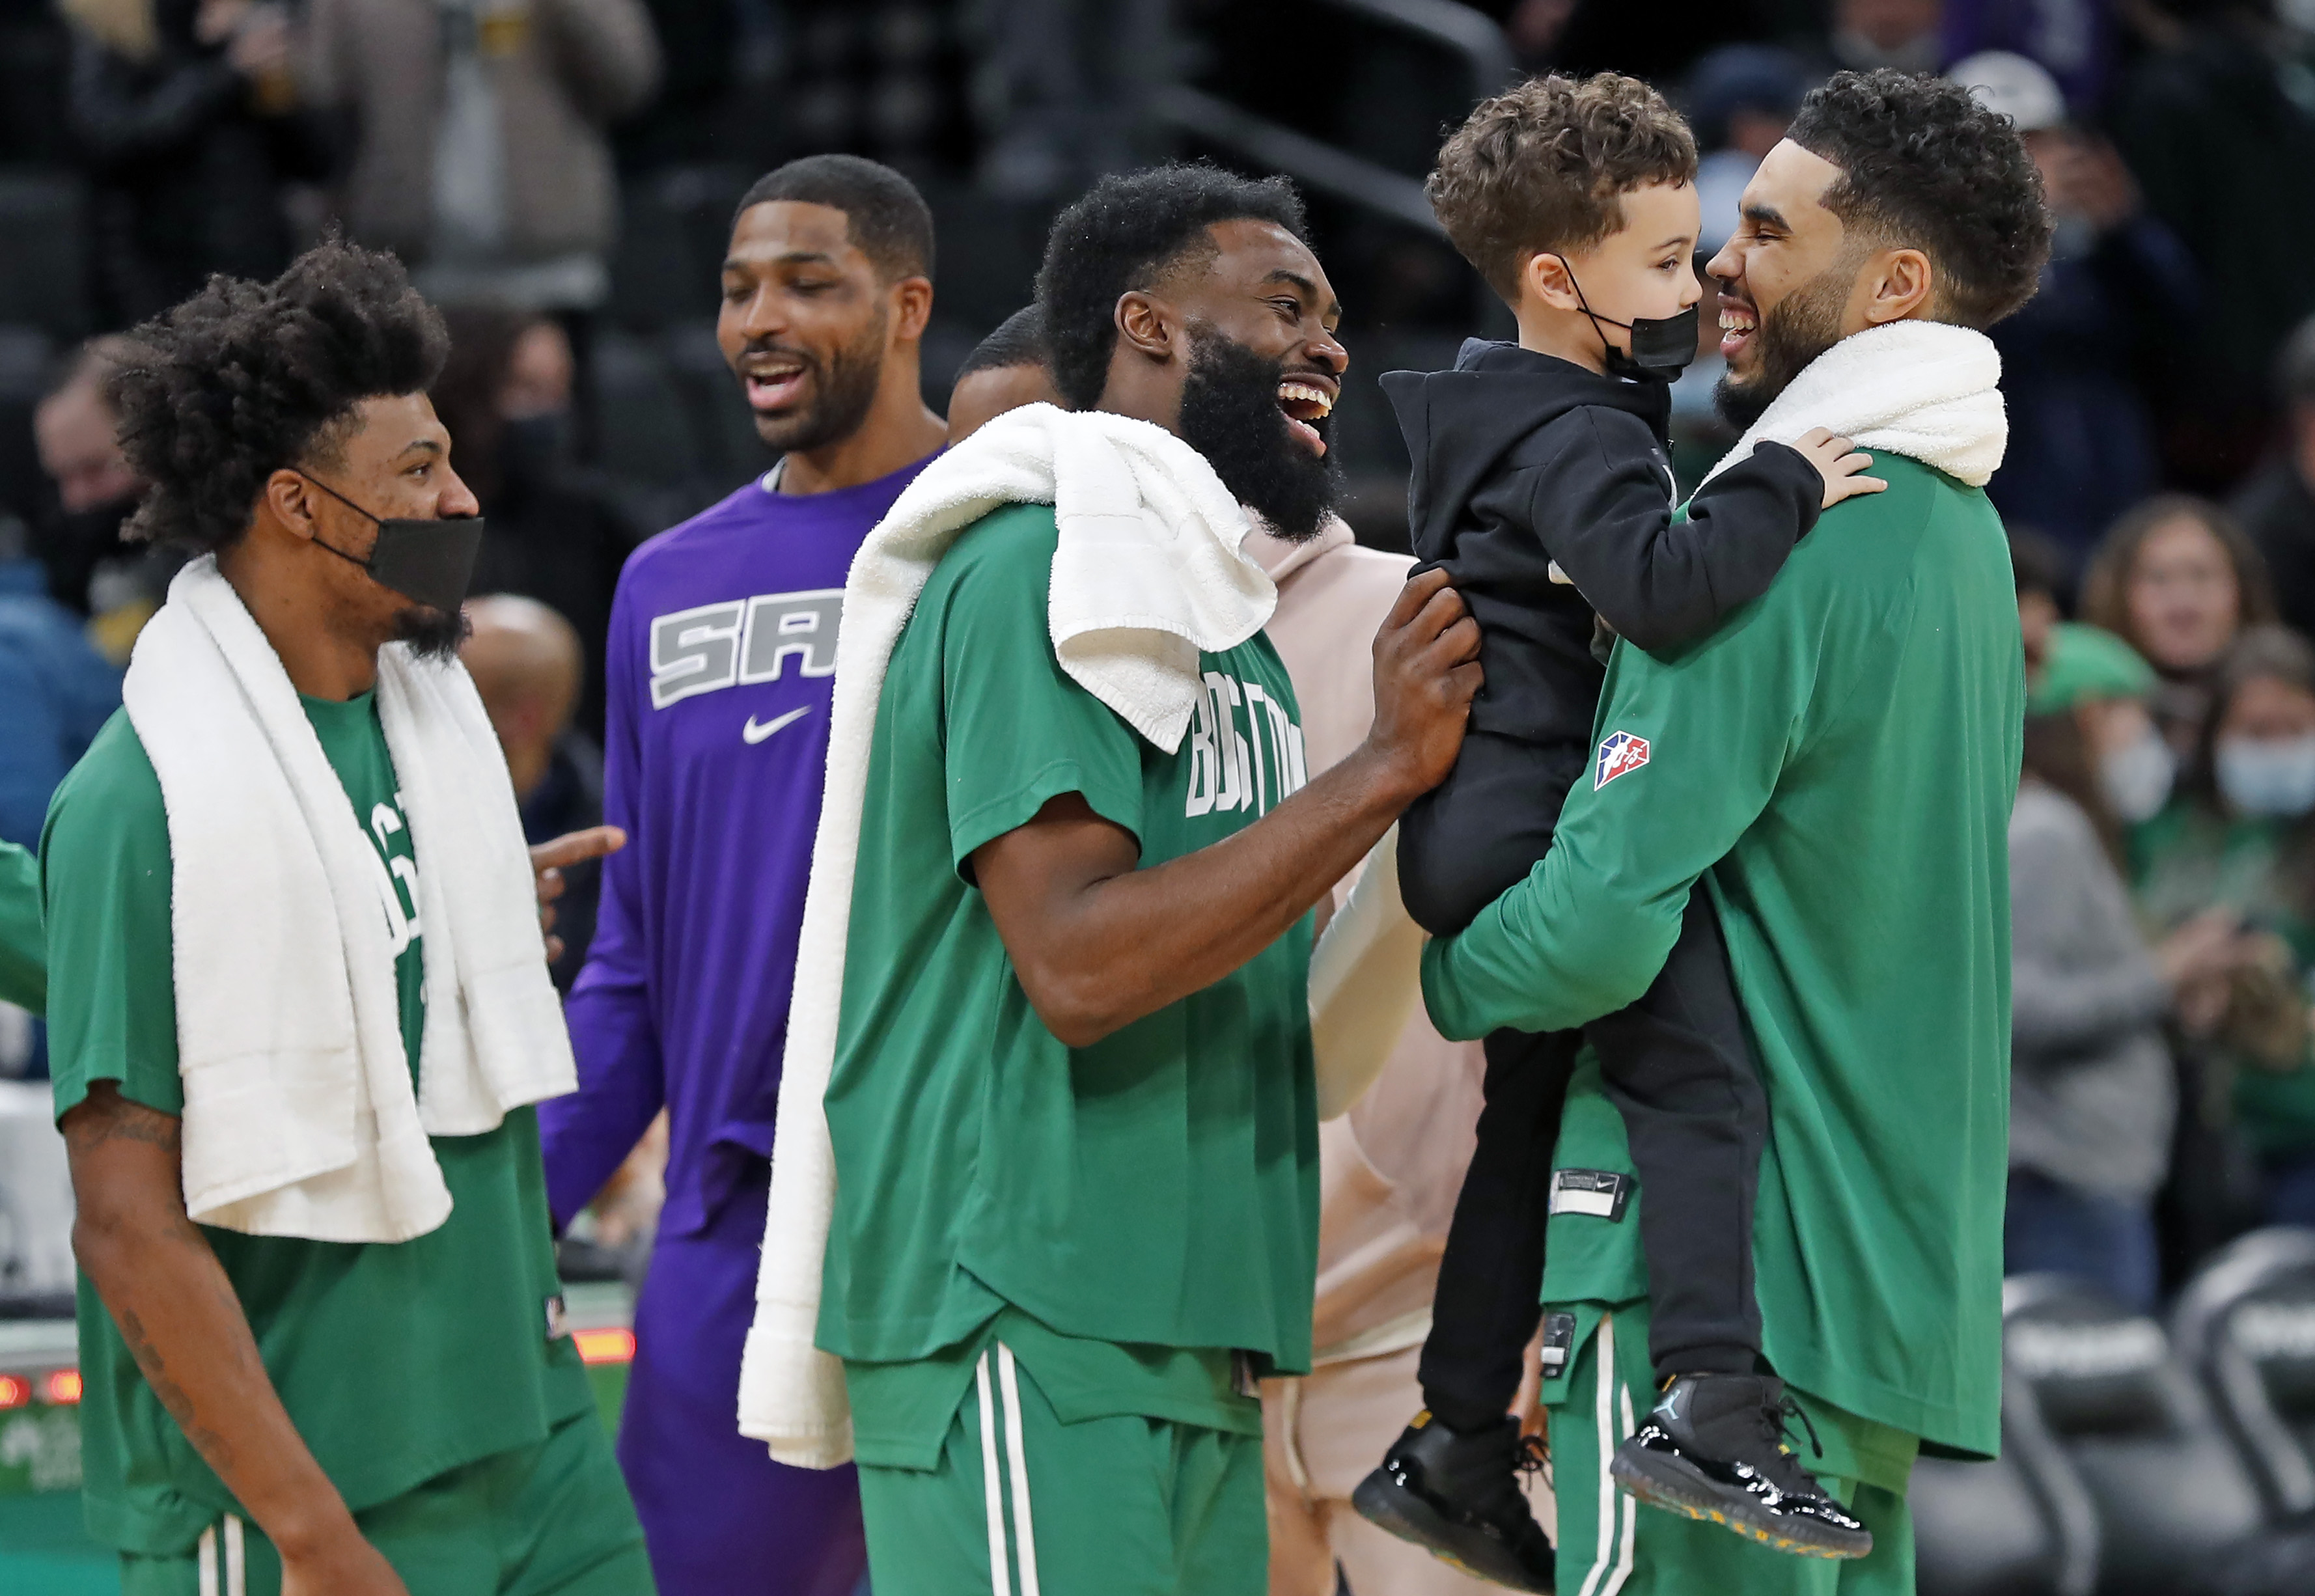 It's Deuce Tatum's world, and the Celtics are just living in it